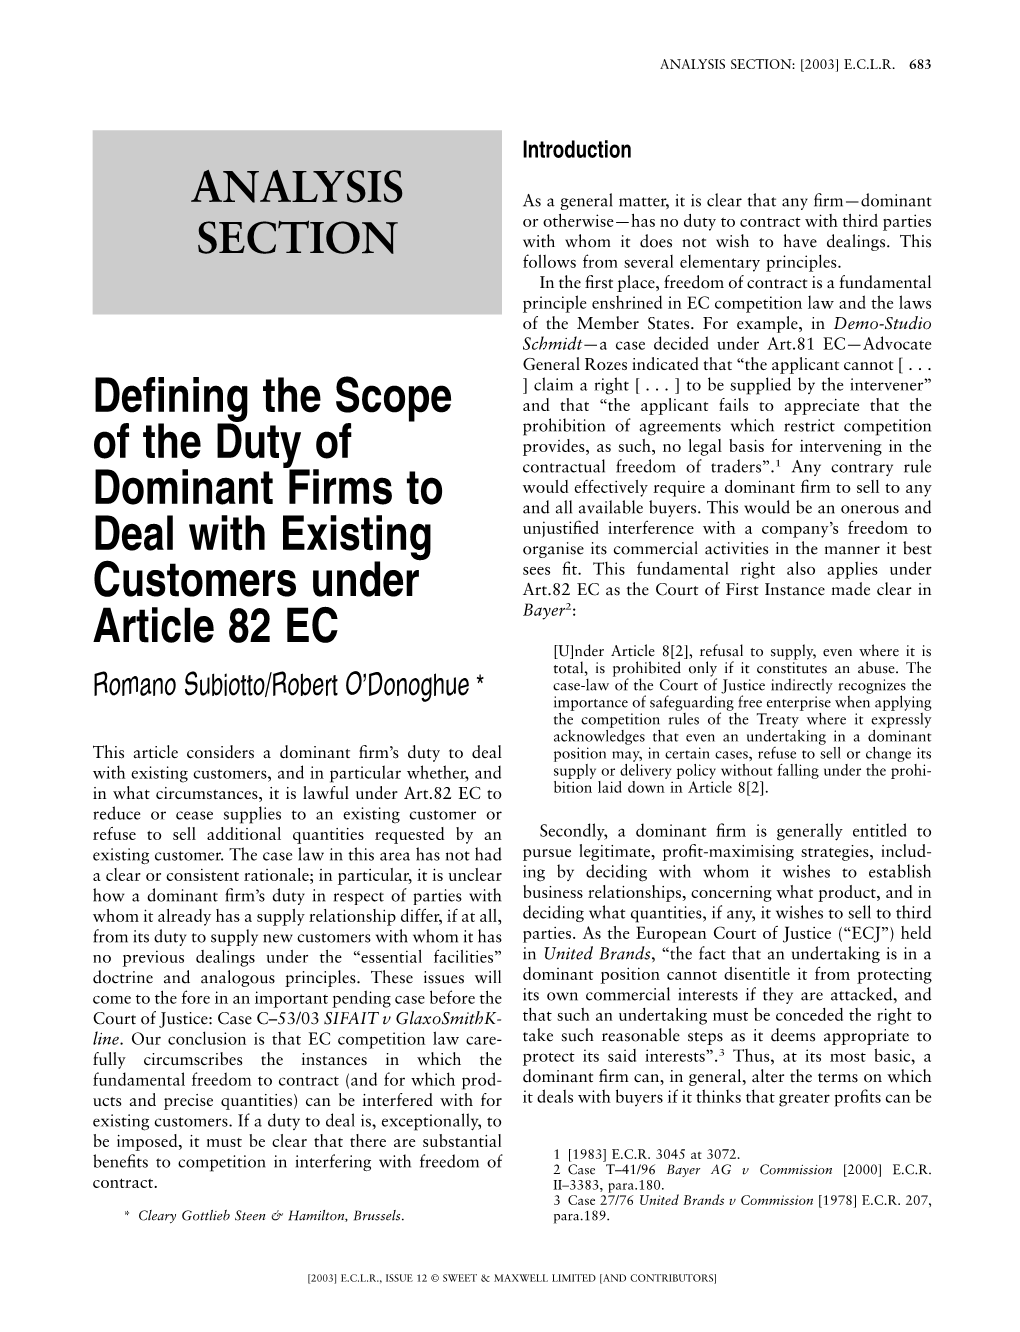 Defining the Scope of the Duty of Dominant Firms to Deal With